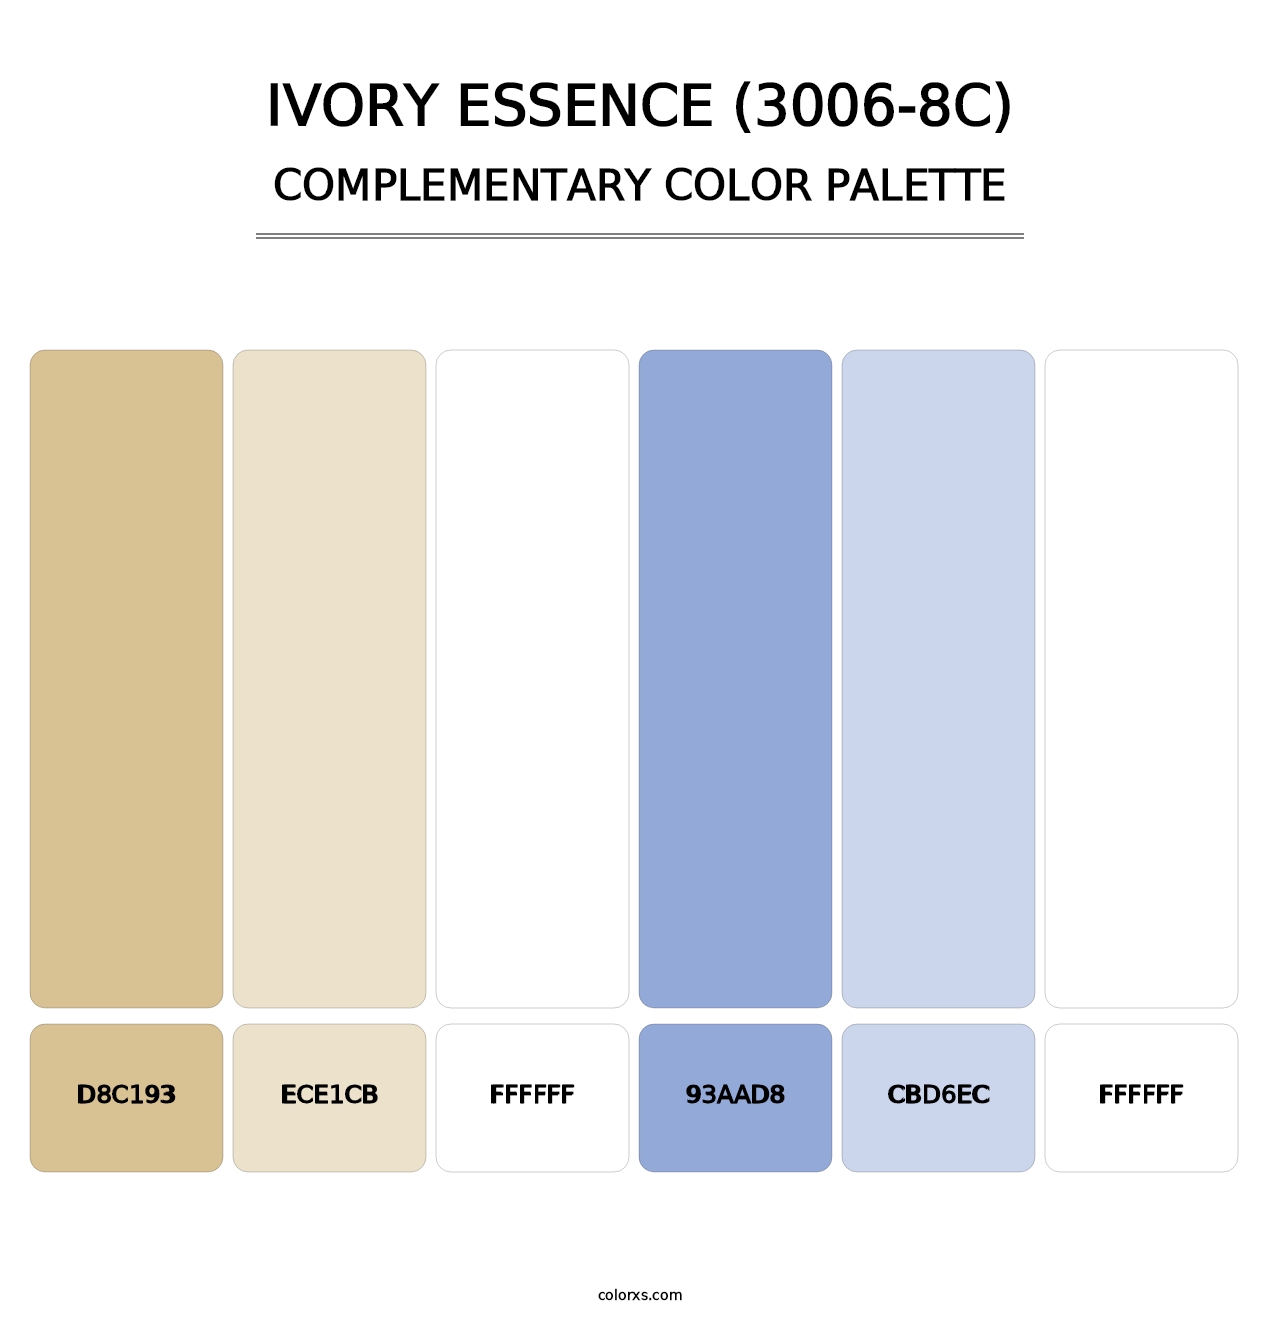 Ivory Essence (3006-8C) - Complementary Color Palette